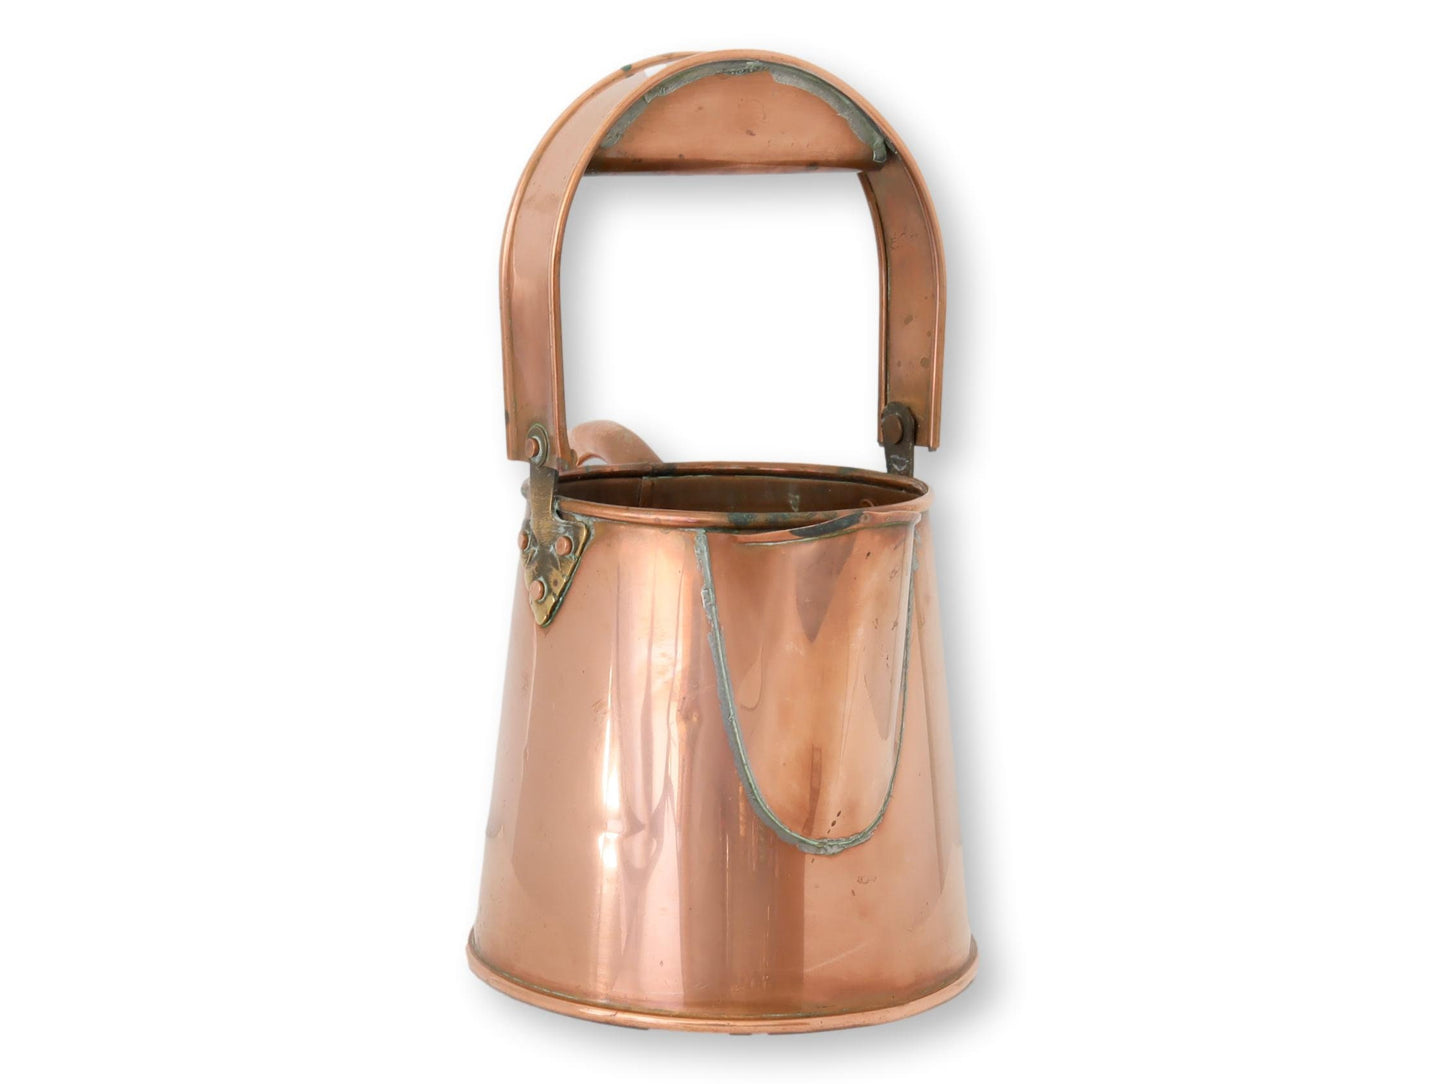 C. 1880 English Copper Watering Can